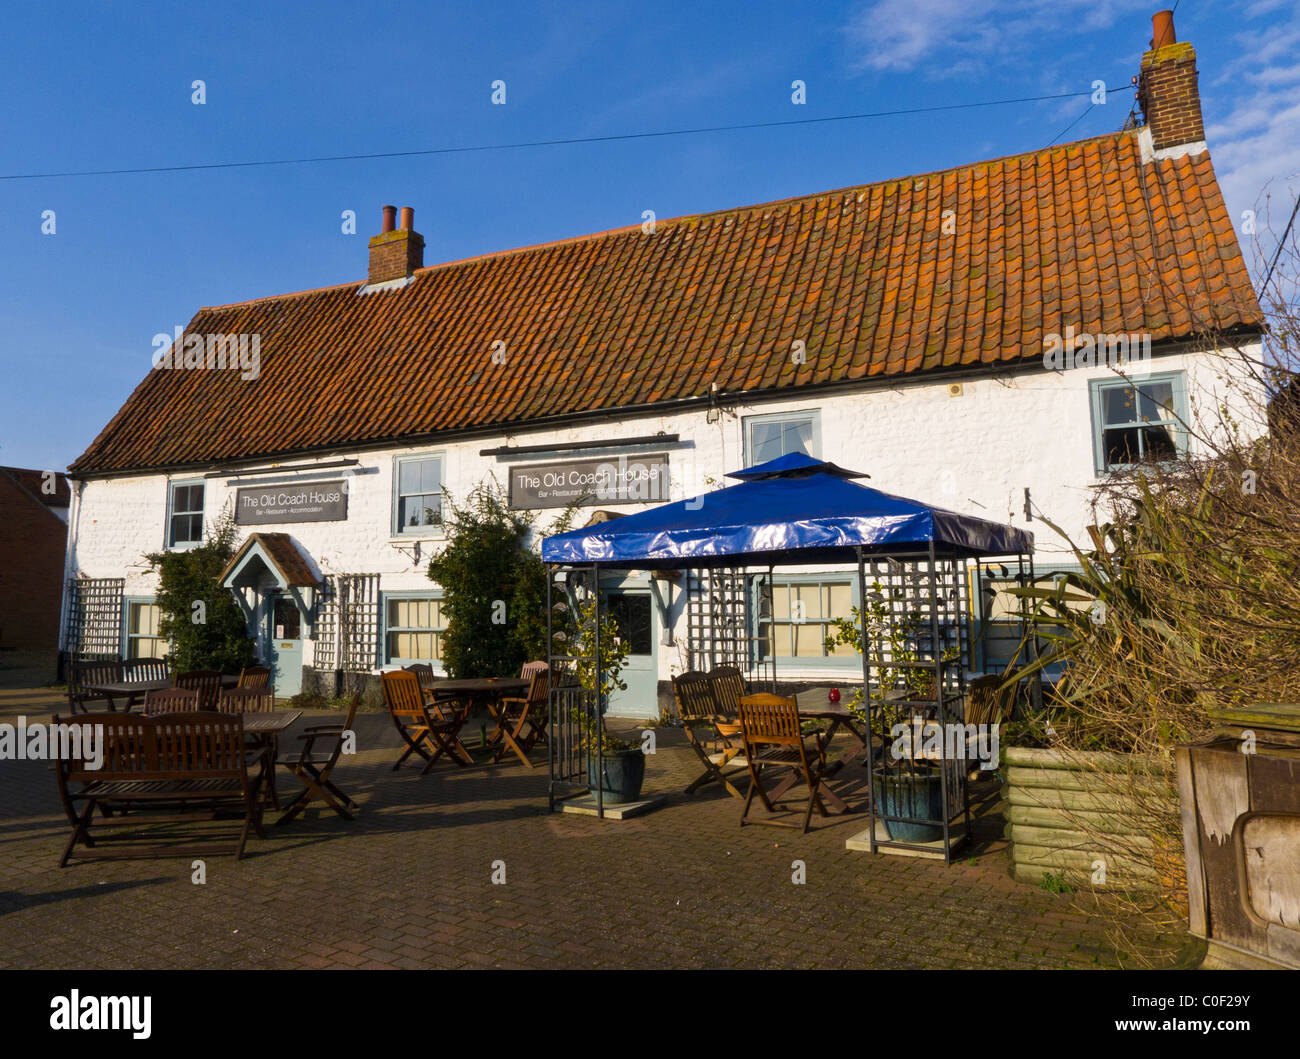 The Old Coach House public house at Thornham on the Norfolk coast. Stock Photo